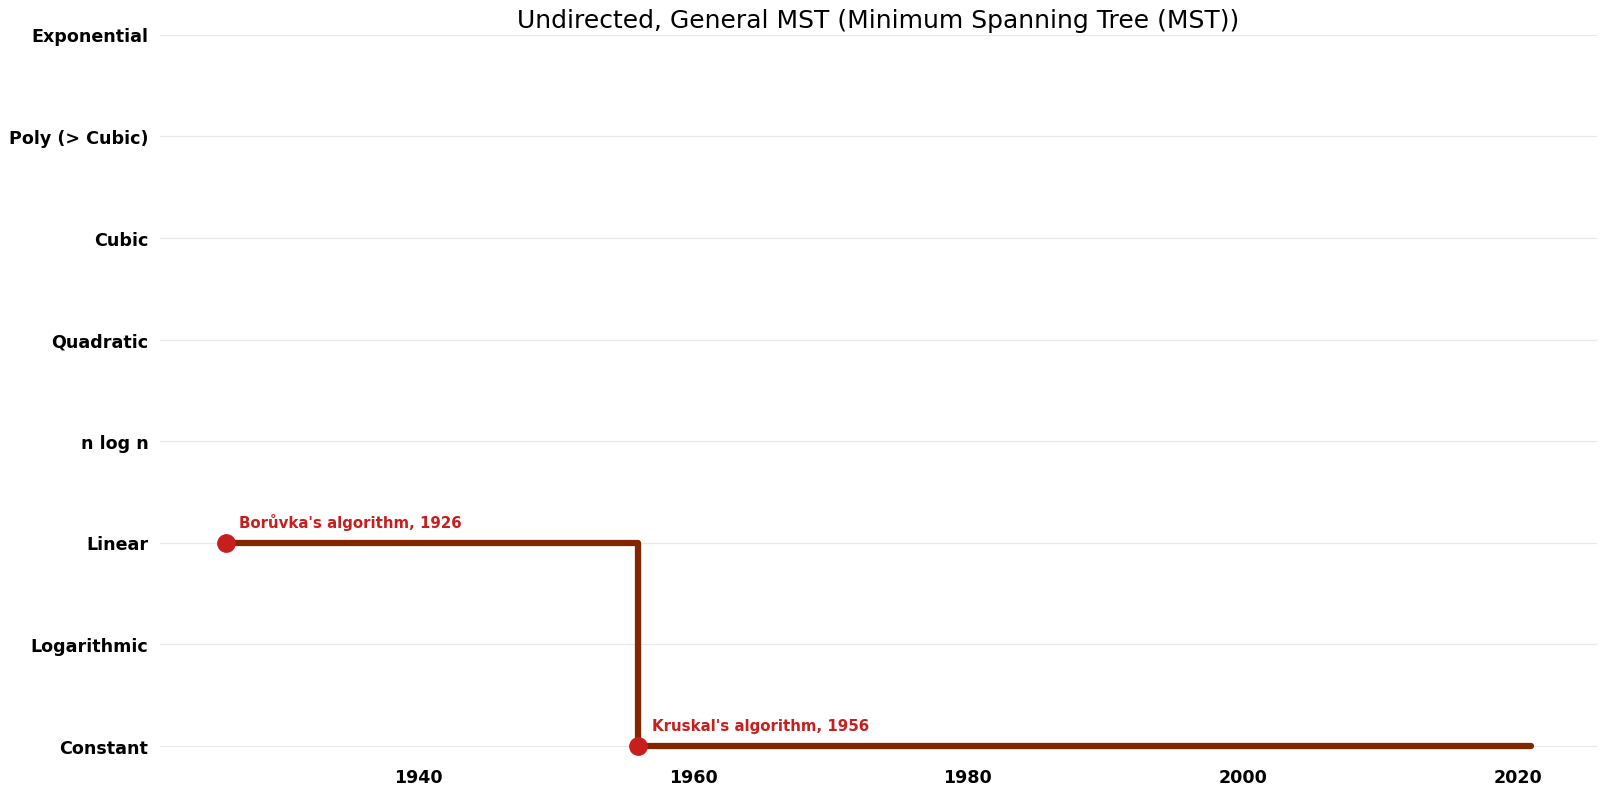 Minimum Spanning Tree (MST) - Undirected, General MST - Space.png